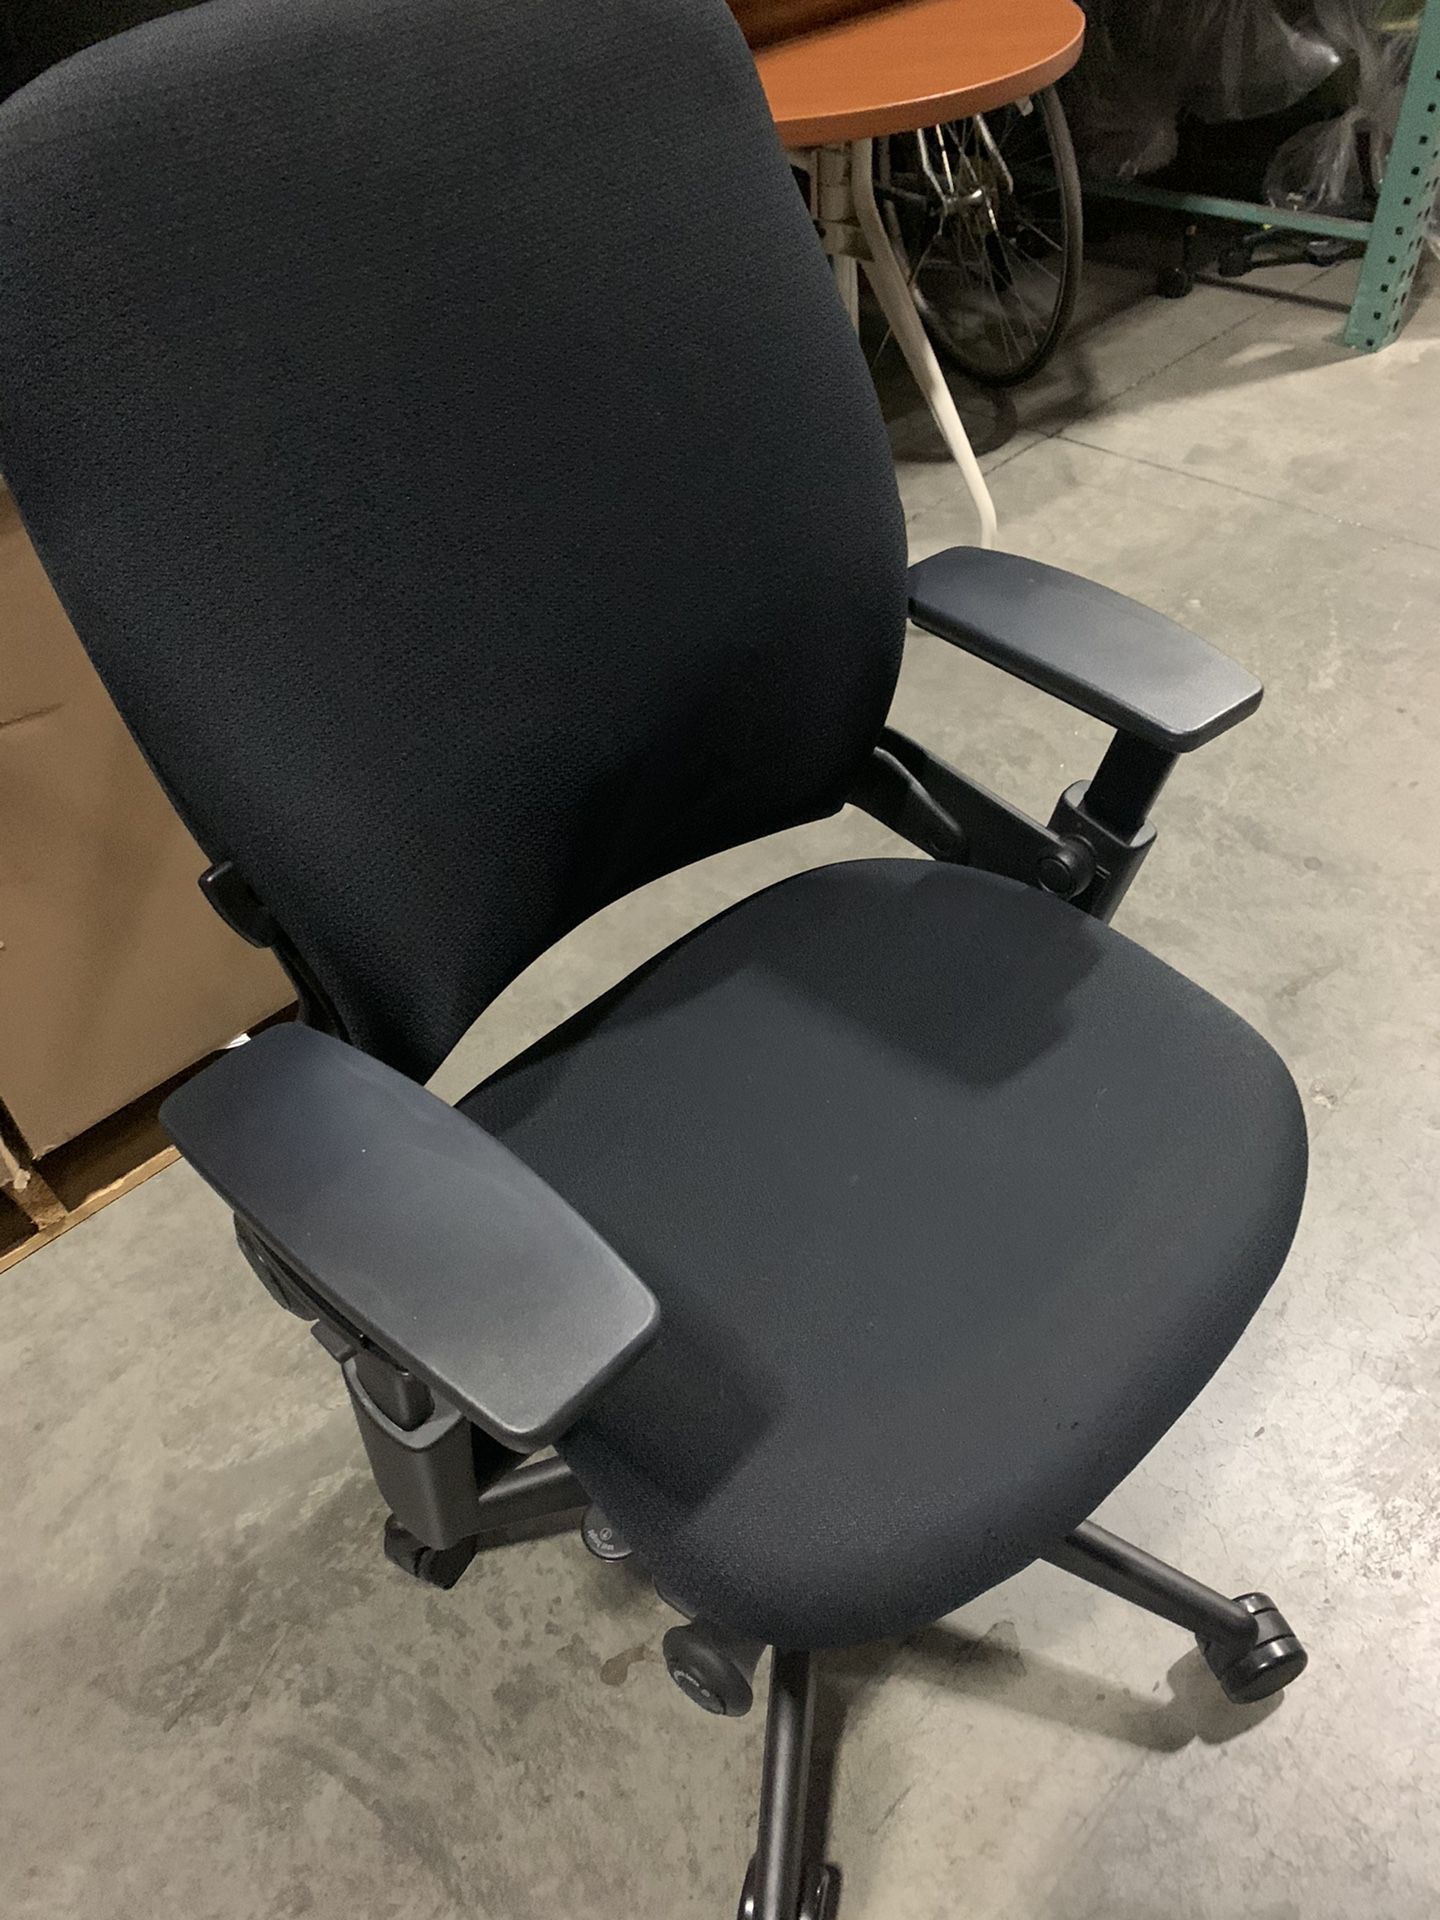 Steelcase V2 Leap chair